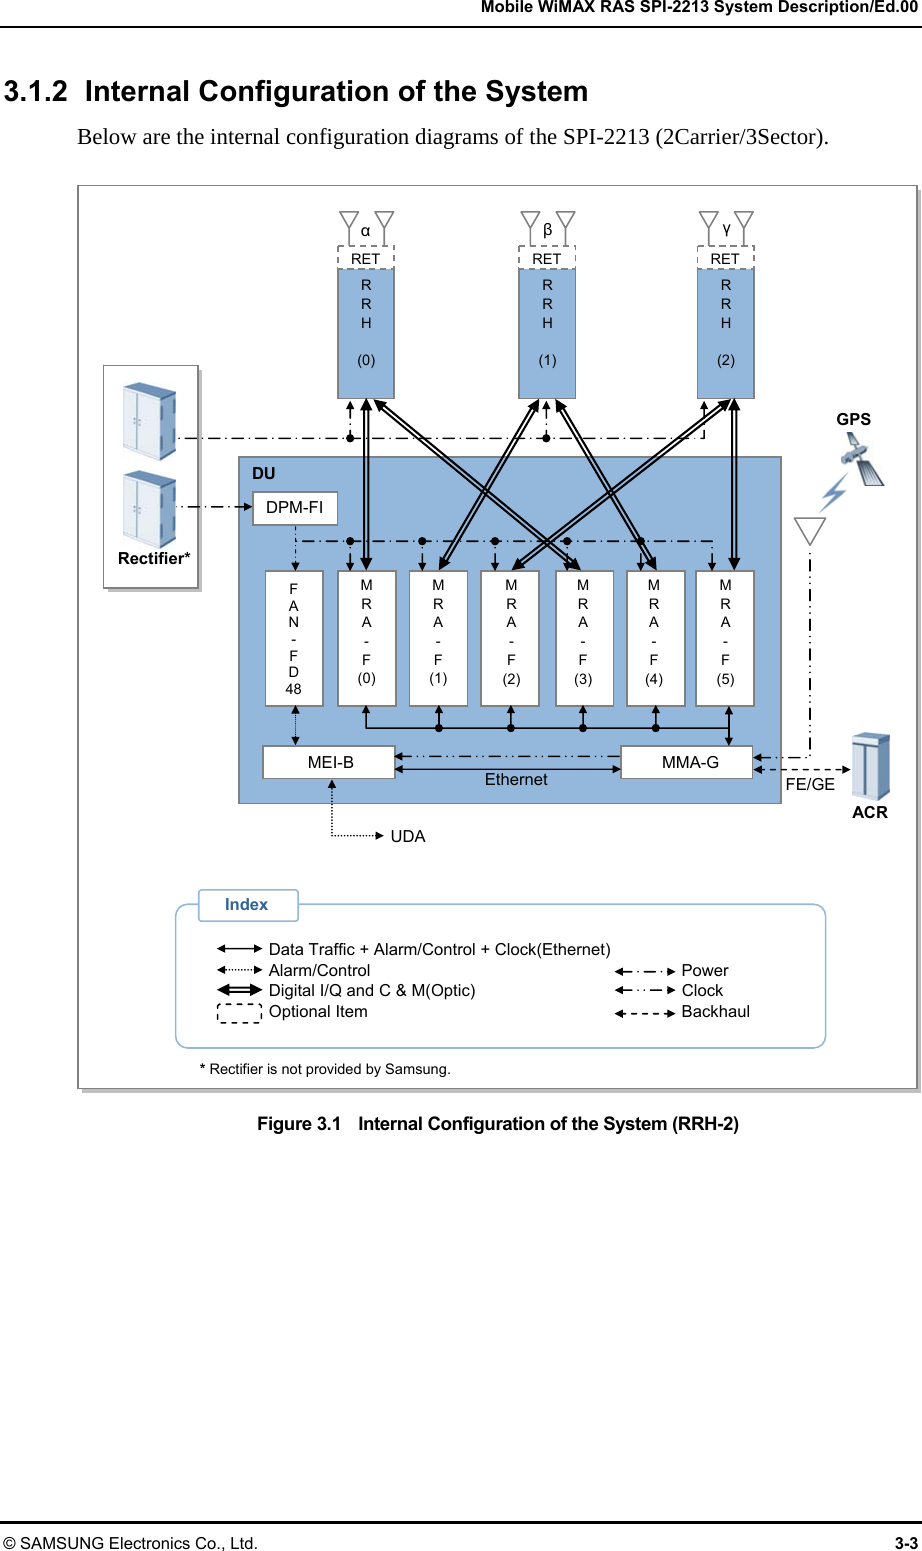   Mobile WiMAX RAS SPI-2213 System Description/Ed.00 © SAMSUNG Electronics Co., Ltd.  3-3 3.1.2  Internal Configuration of the System Below are the internal configuration diagrams of the SPI-2213 (2Carrier/3Sector).  Figure 3.1    Internal Configuration of the System (RRH-2) αβγ R R H  (0) RETR R H  (1) RETR R H  (2) RET DU DPM-FI F A N - F D 48 M R A - F (0) EthernetUDAM R A - F (1) M R A - F (2) M R A - F (3) M R A - F (4) M R A - F (5) MMA-G MEI-BFE/GE ACRRectifier*Data Traffic + Alarm/Control + Clock(Ethernet) Alarm/Control Power Digital I/Q and C &amp; M(Optic)  Clock Optional Item  Backhaul Index * Rectifier is not provided by Samsung.   GPS